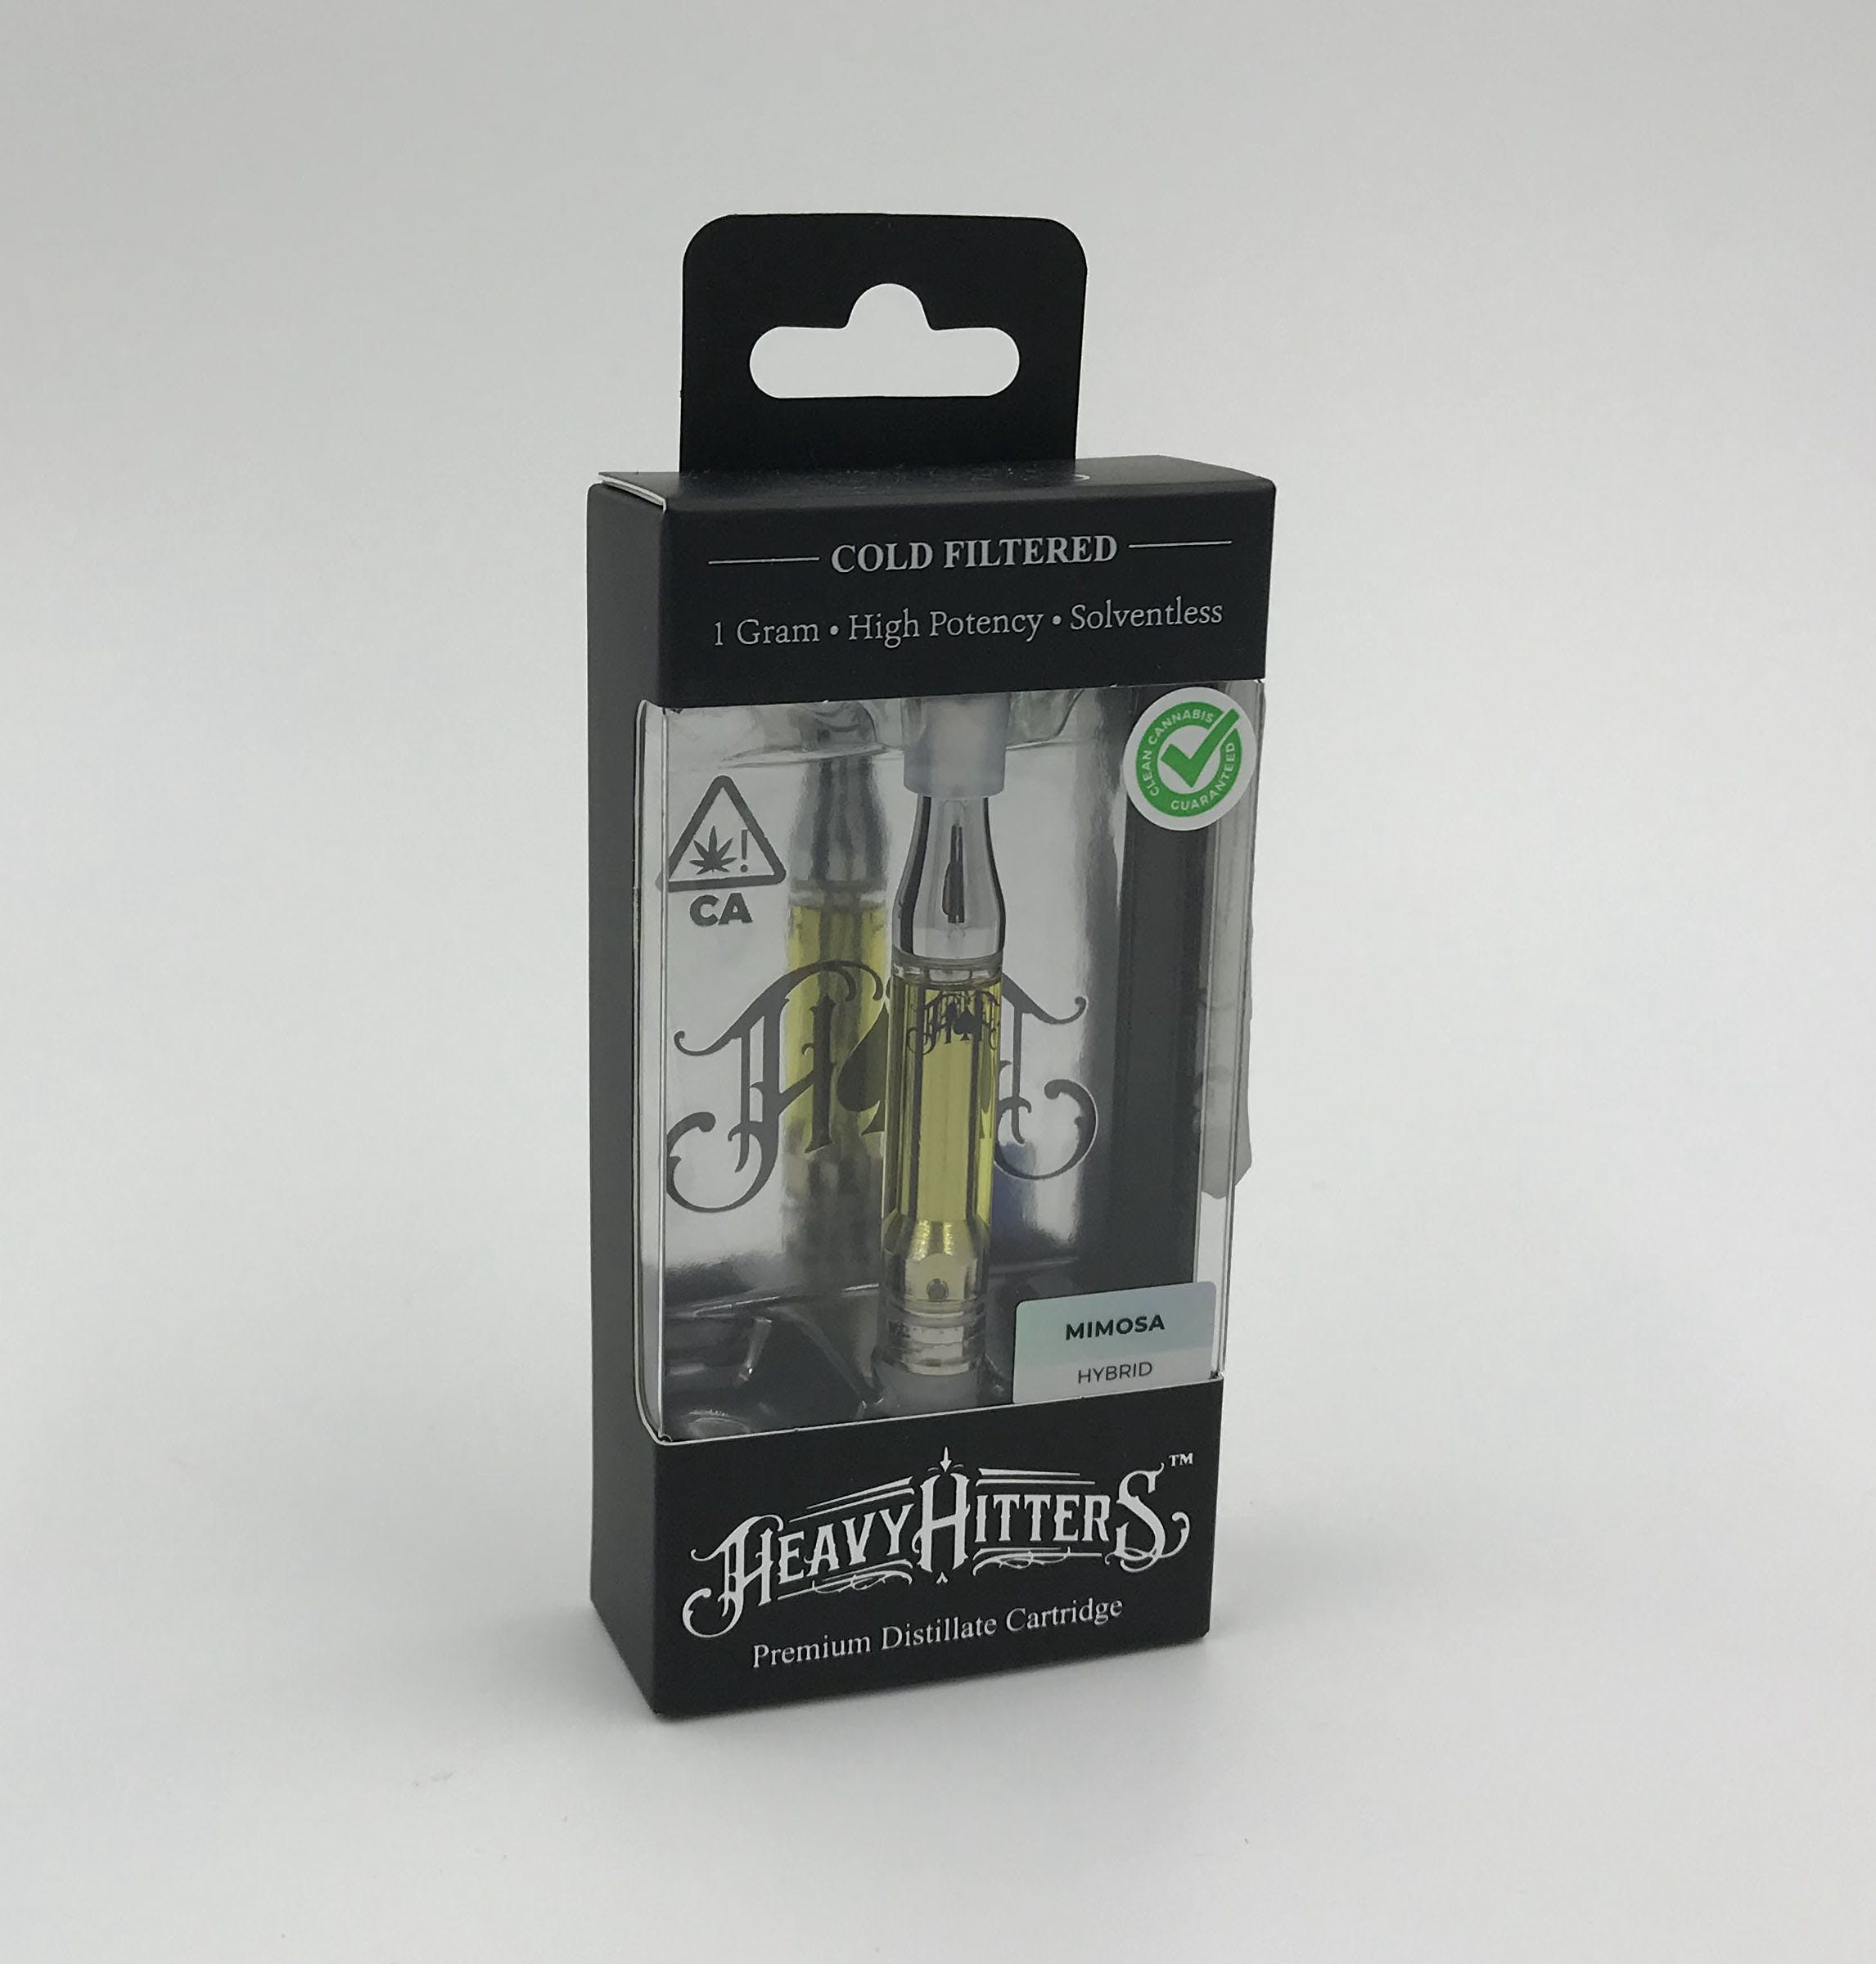 concentrate-heavy-hitters-mimosa-cartridges-by-heavy-hitters